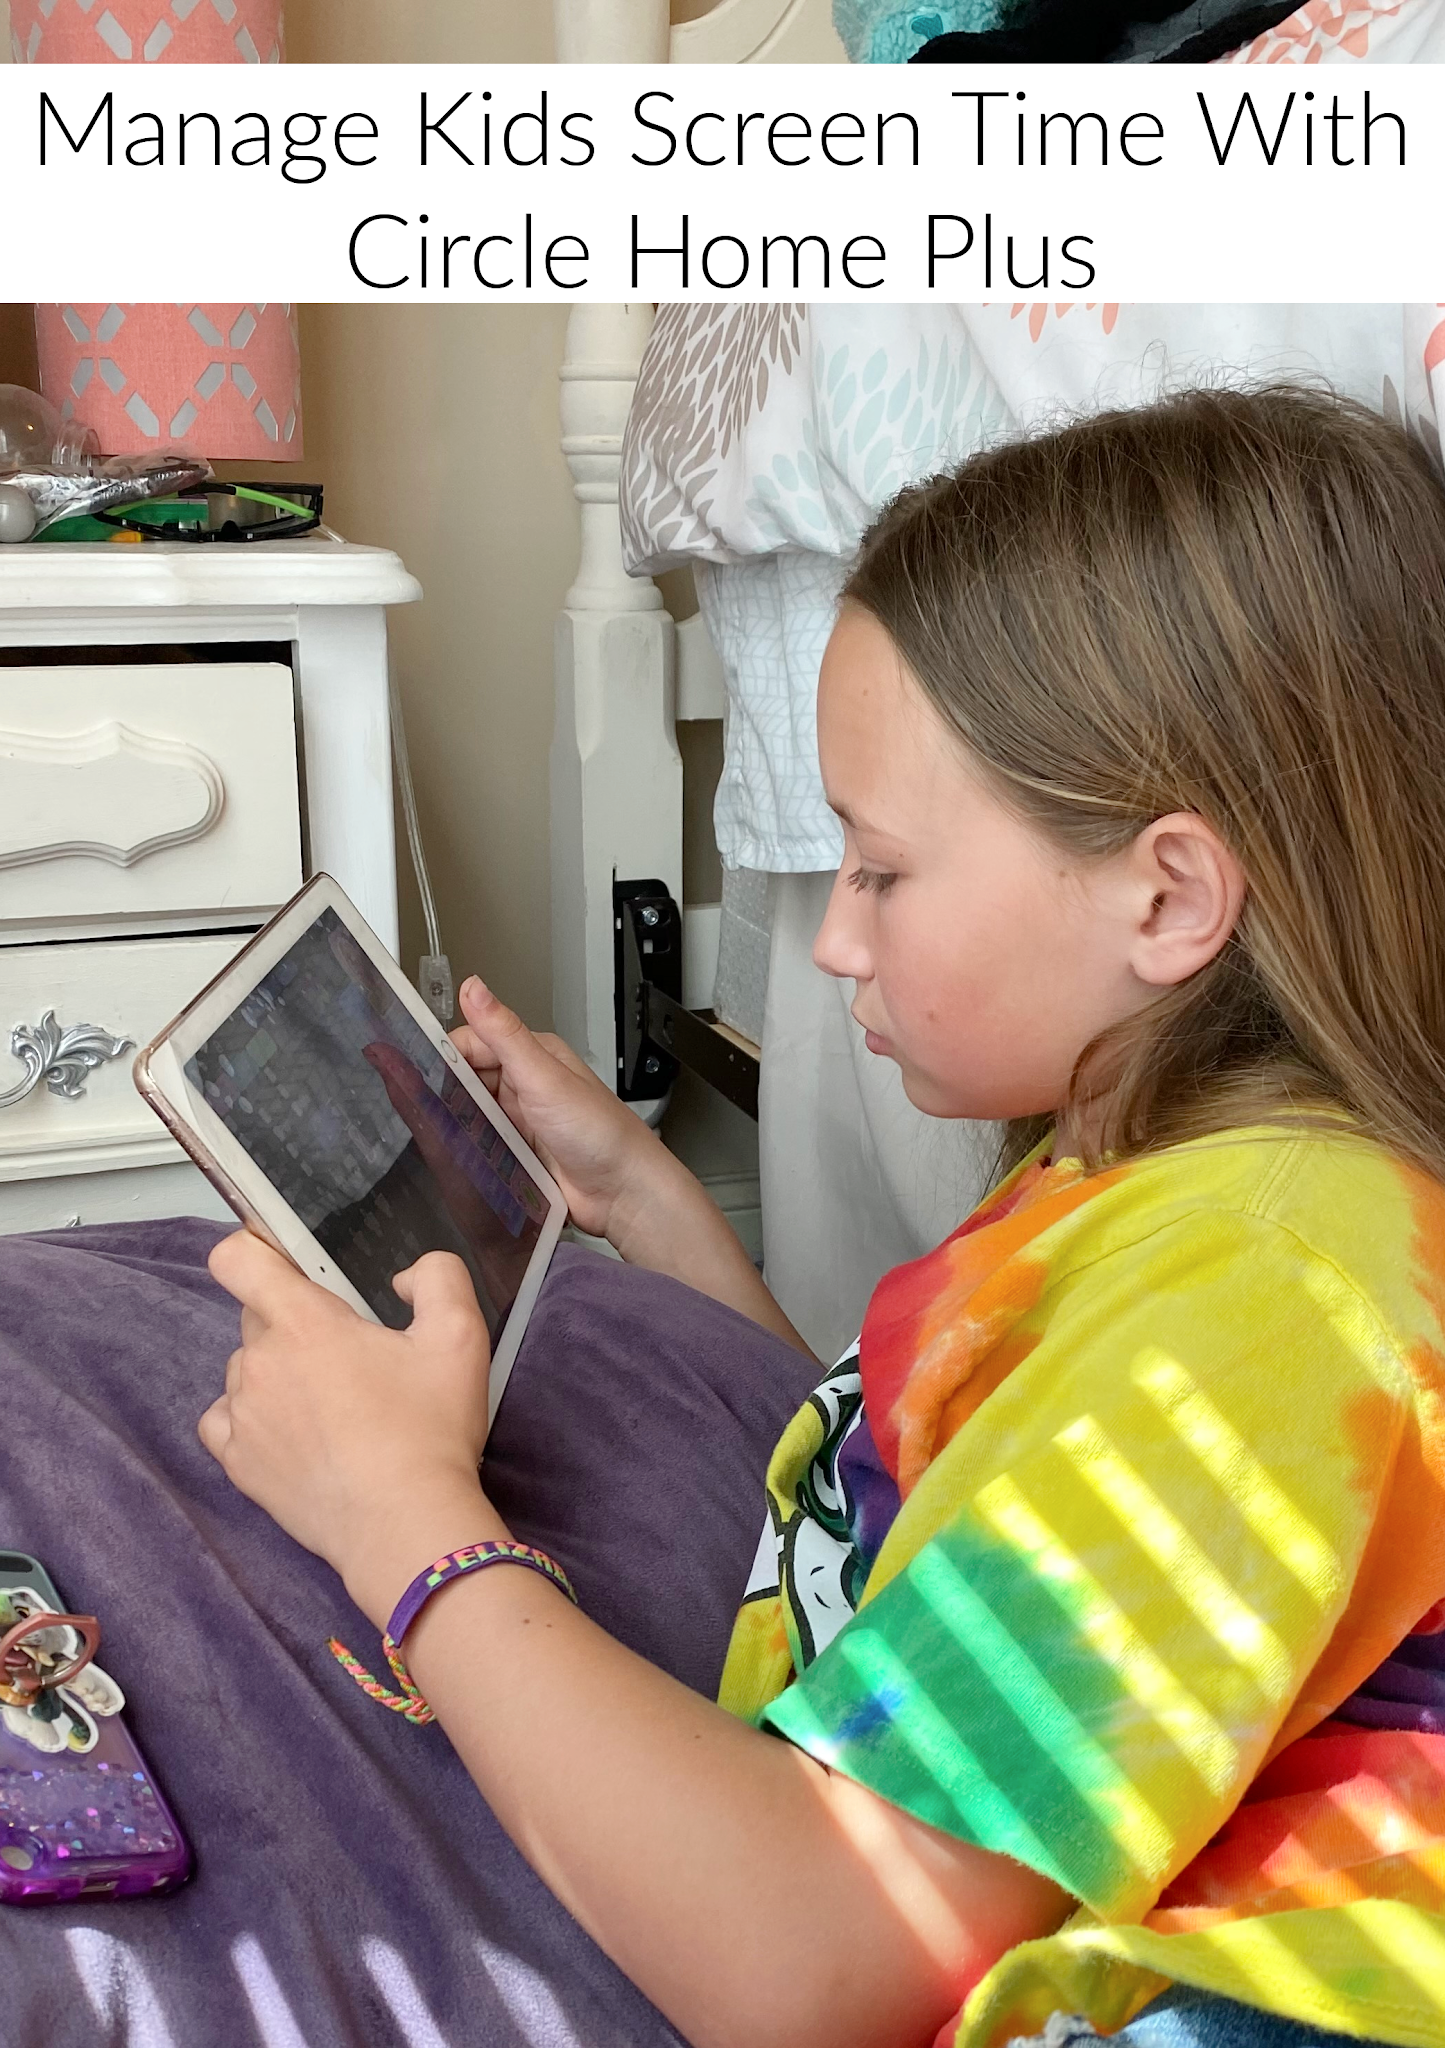 Manage Kids Screen Time With Circle Home Plus